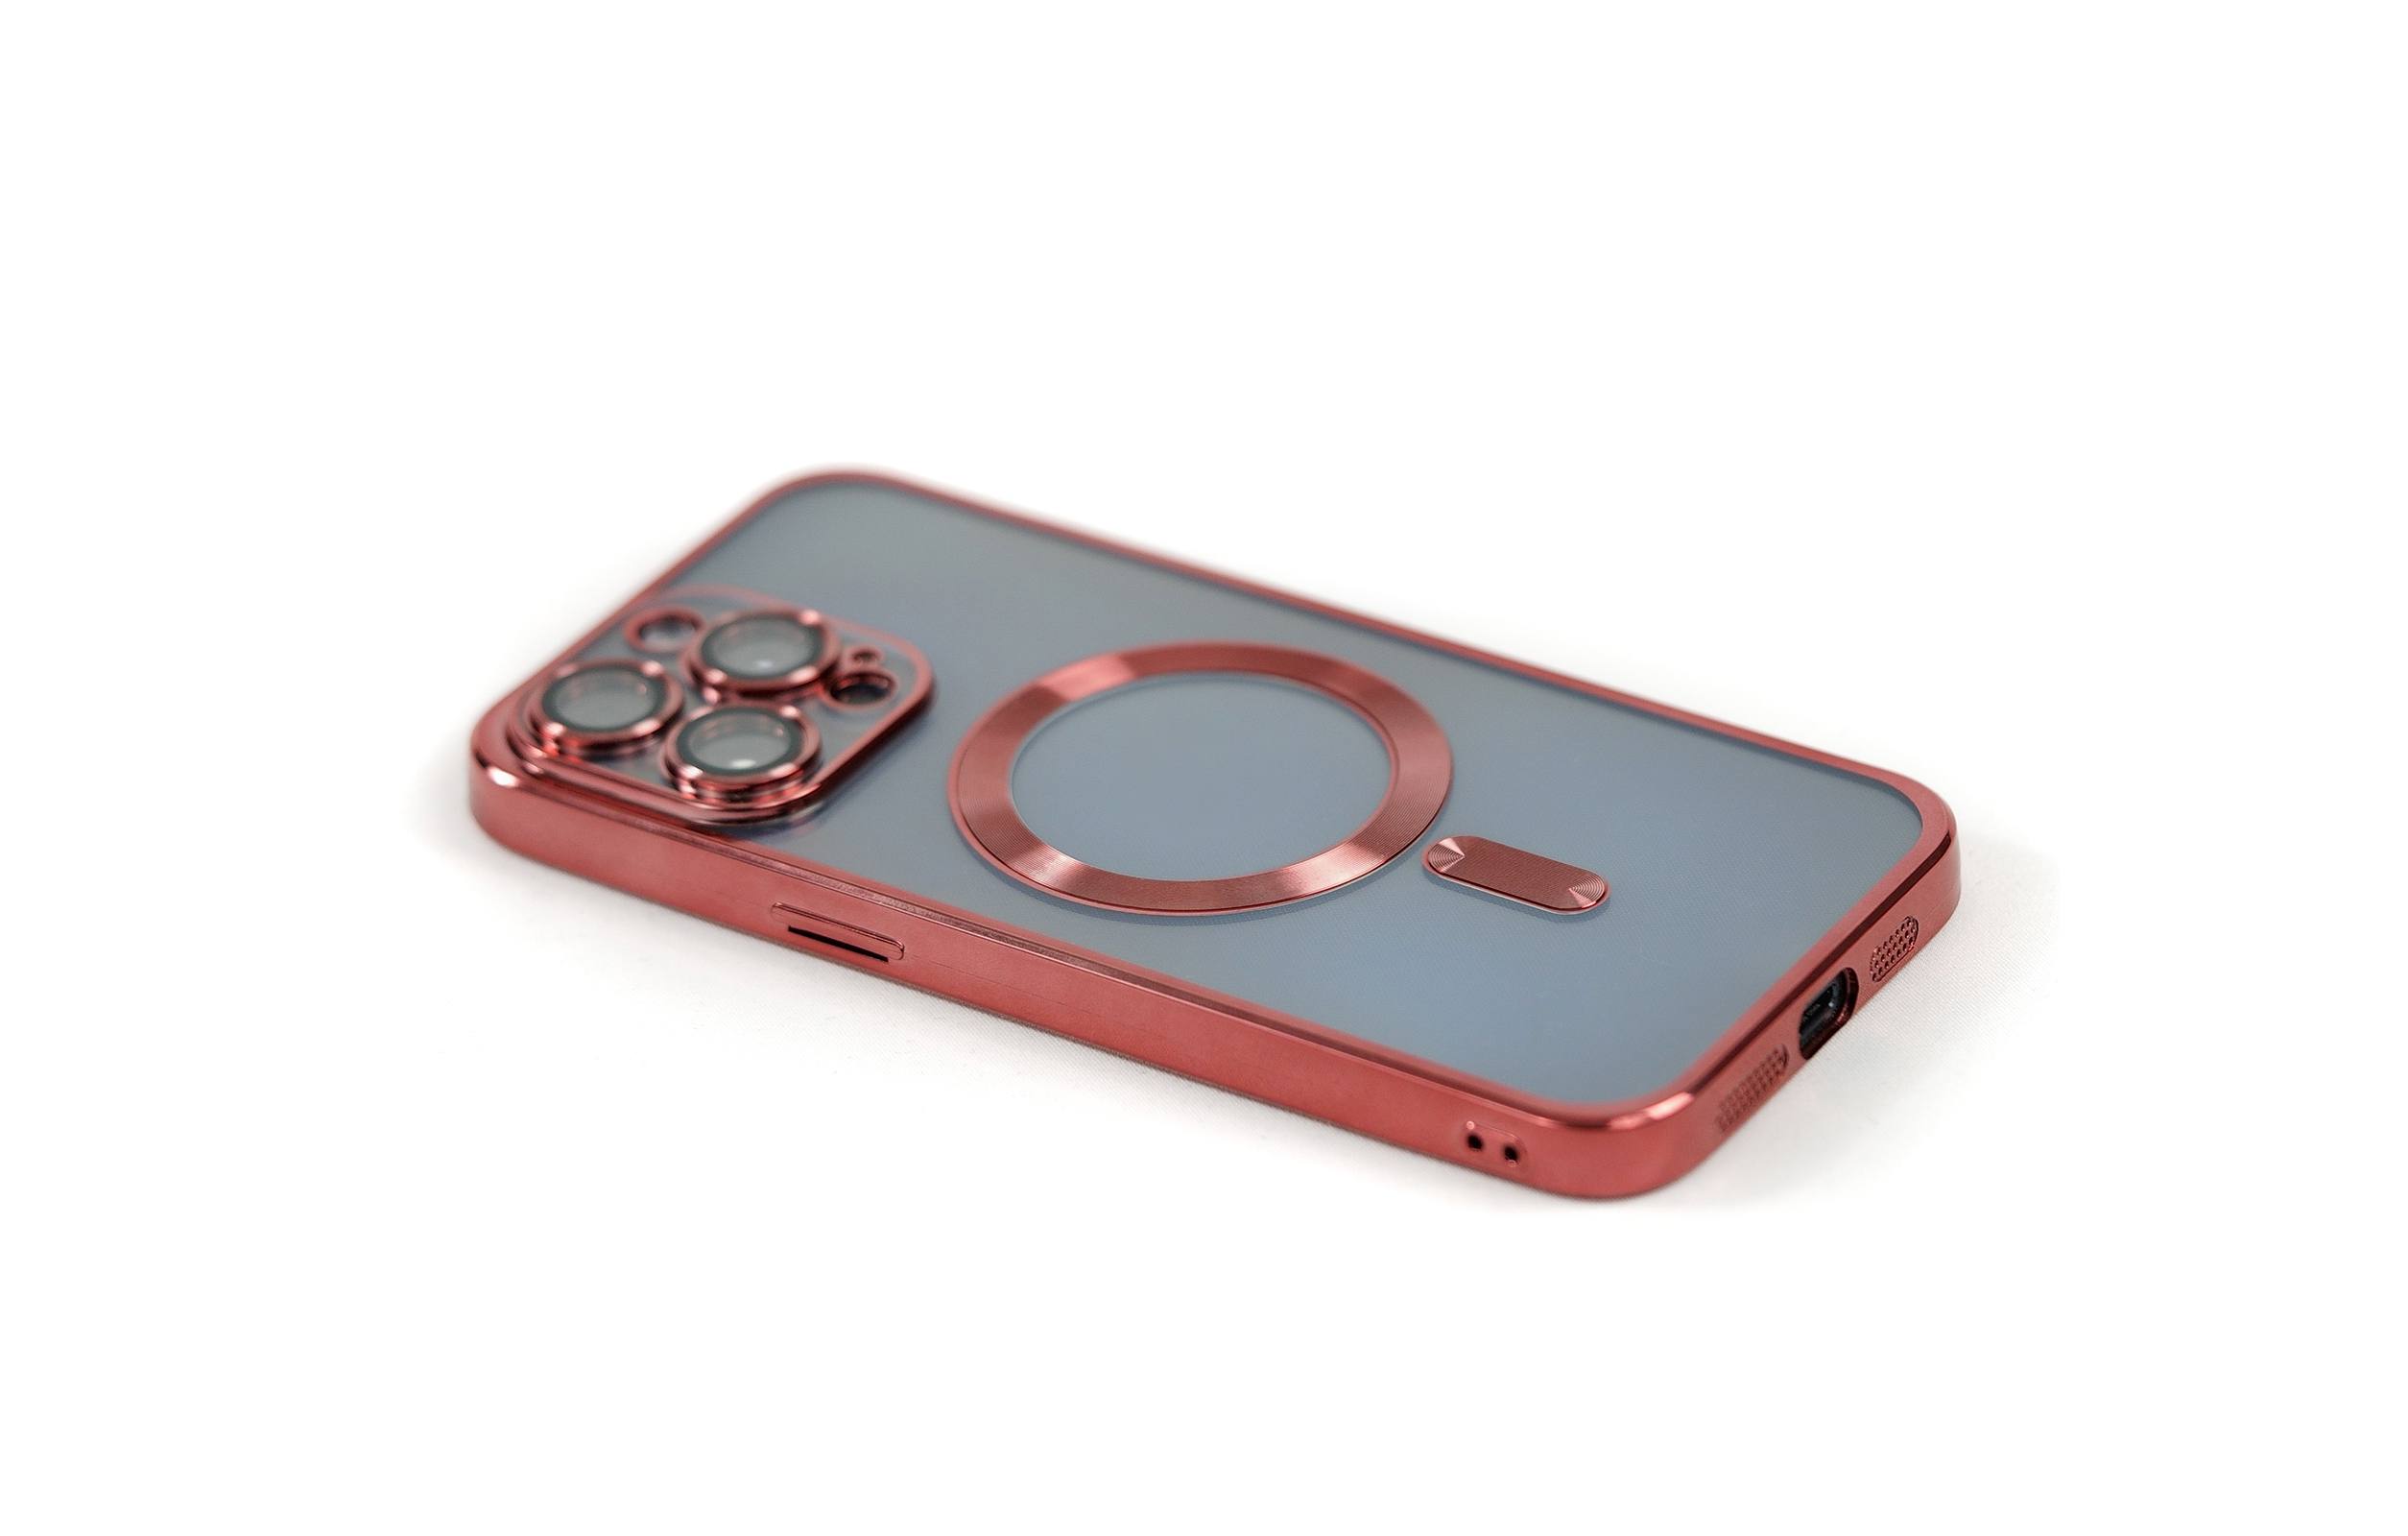 Pro Silikon MagSafe-kompatible, Apple, iPhone Max, Hülle Backcover, ARRIVLY 15 Rot